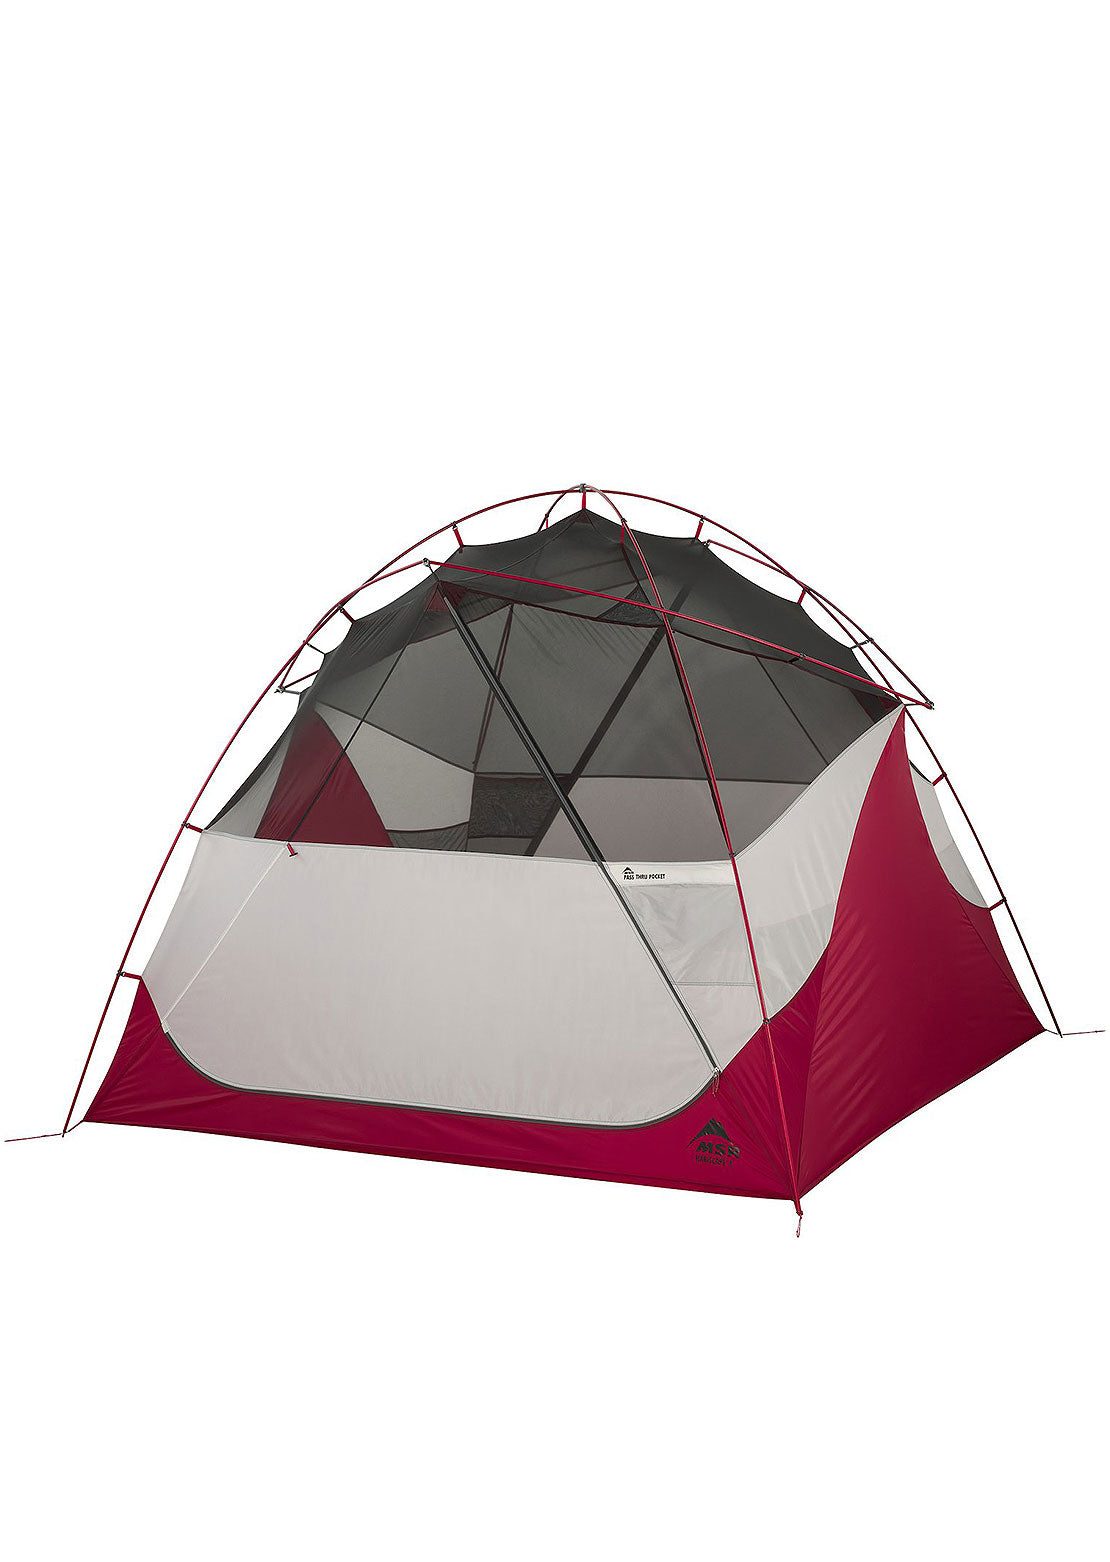 MSR Habiscape 4 Tent